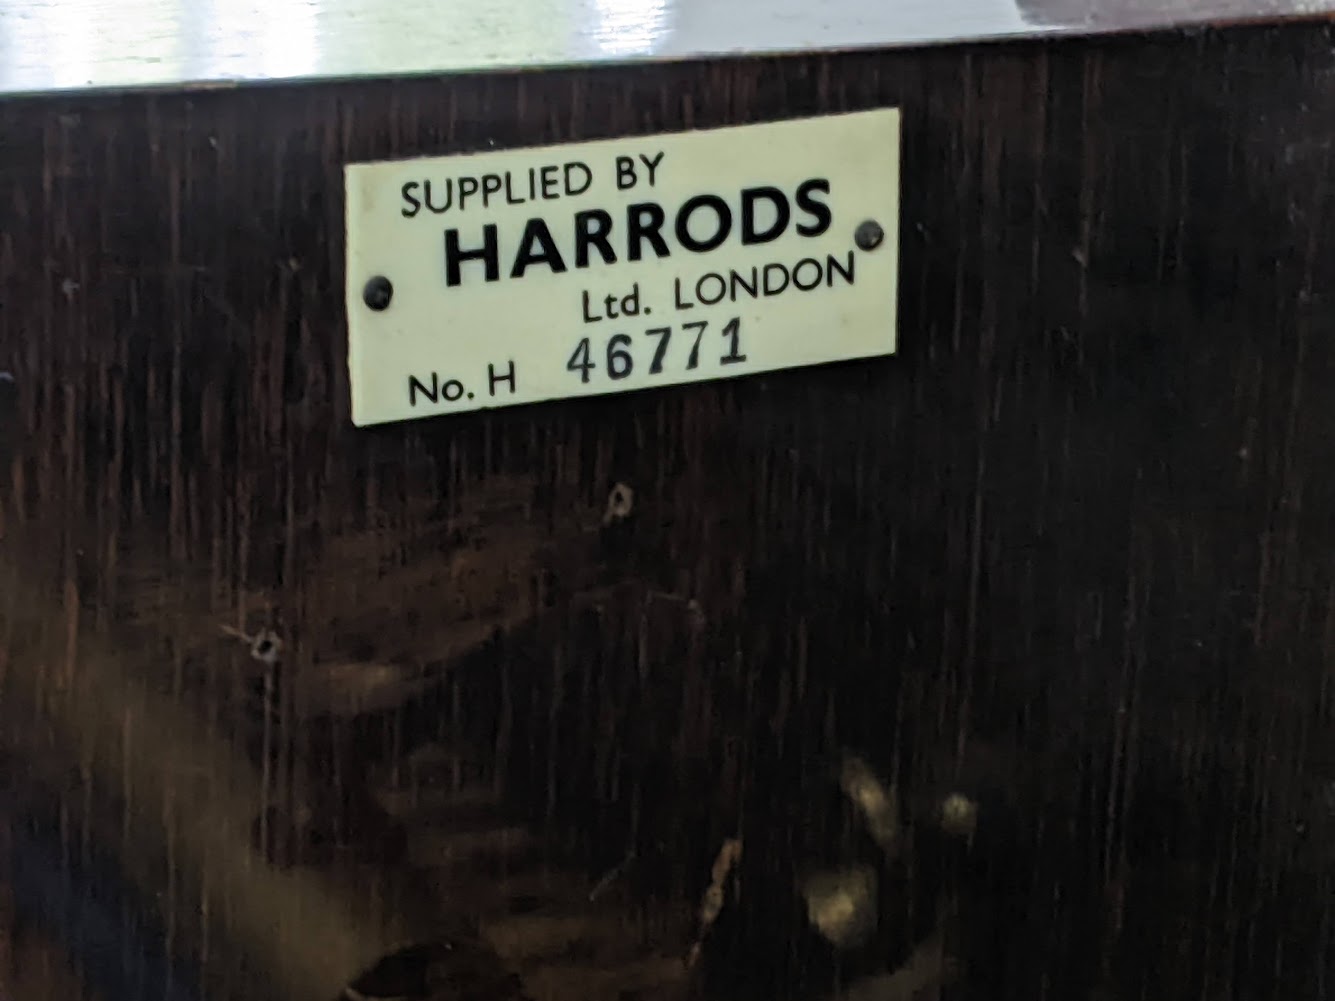 c1896 Bluthner Upright Piano Supplied by Harrods